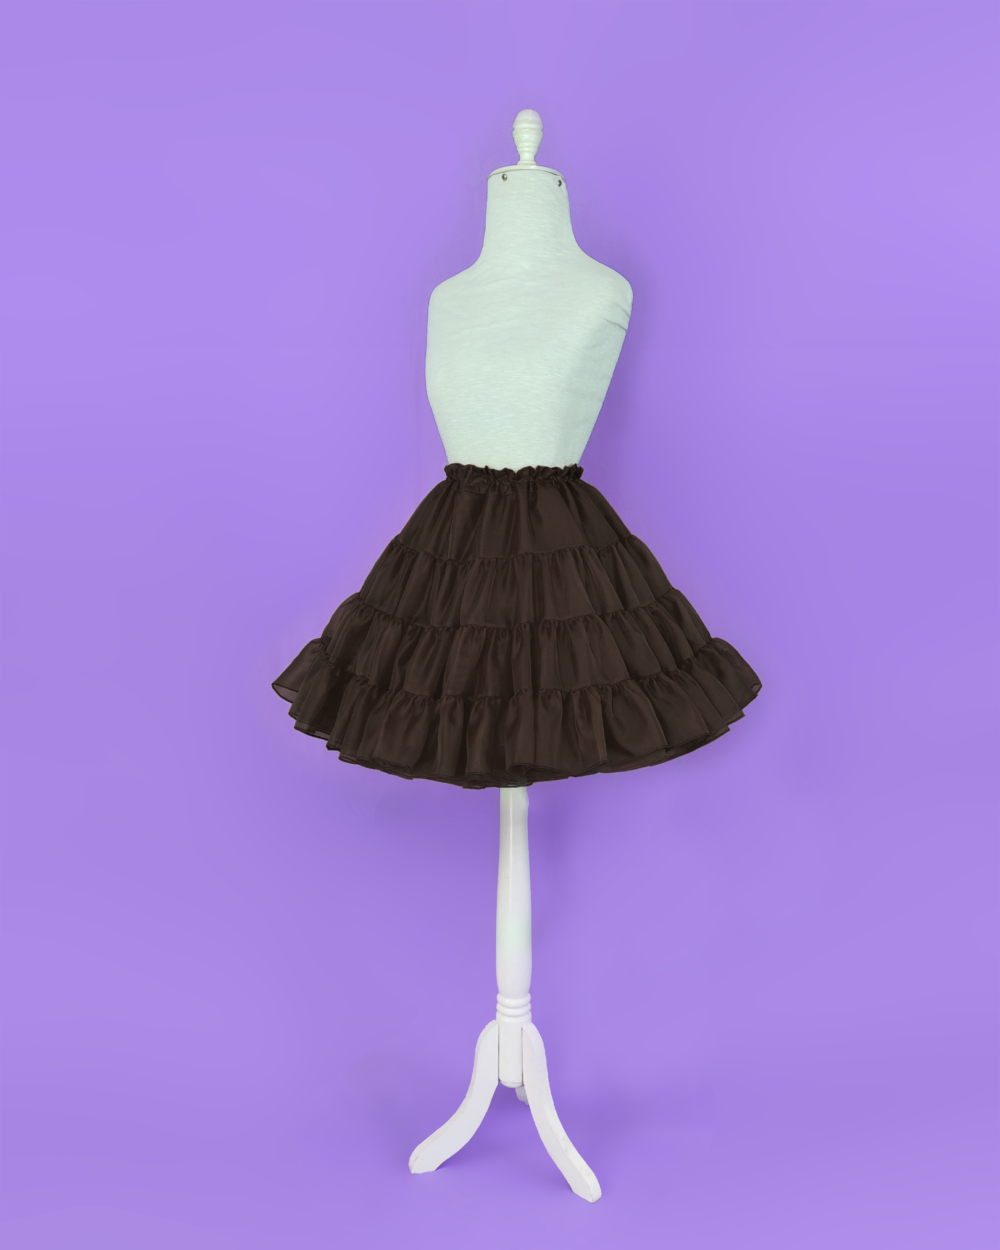 Brown A-line petticoat by MeLikesTea